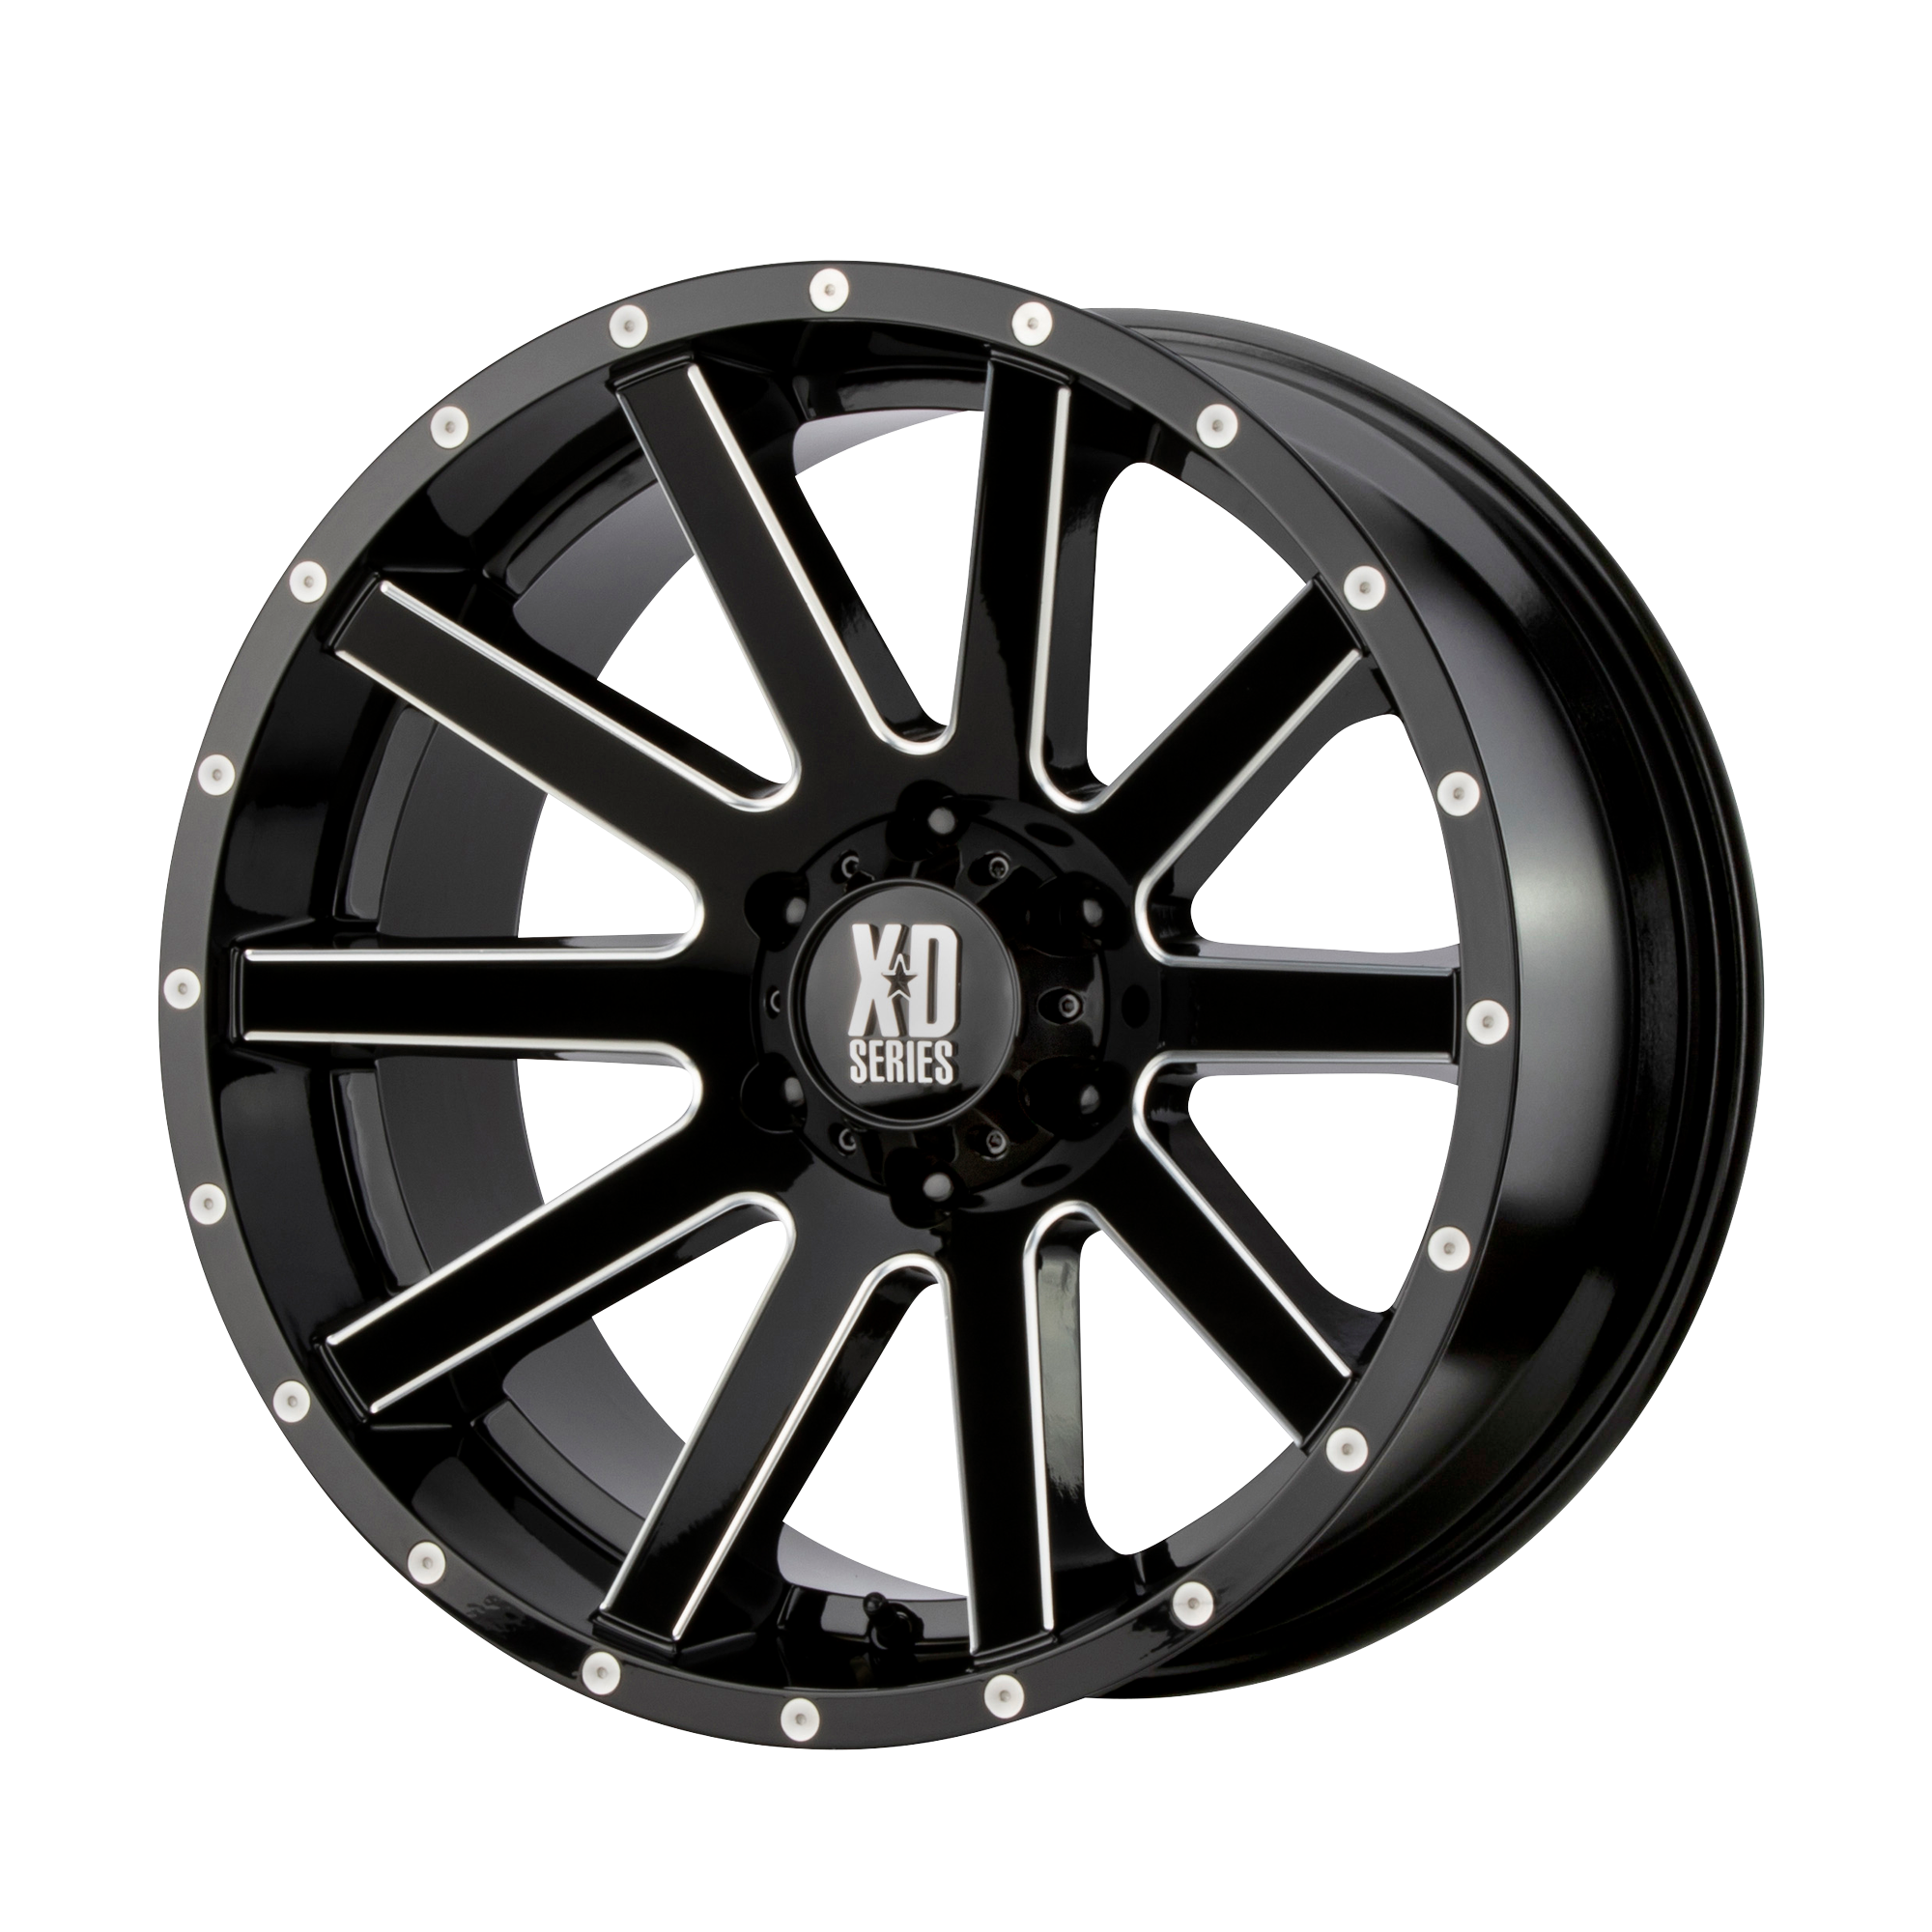 HEIST 20x10 6x135.00 GLOSS BLACK MILLED (-24 mm) - Tires and Engine Performance